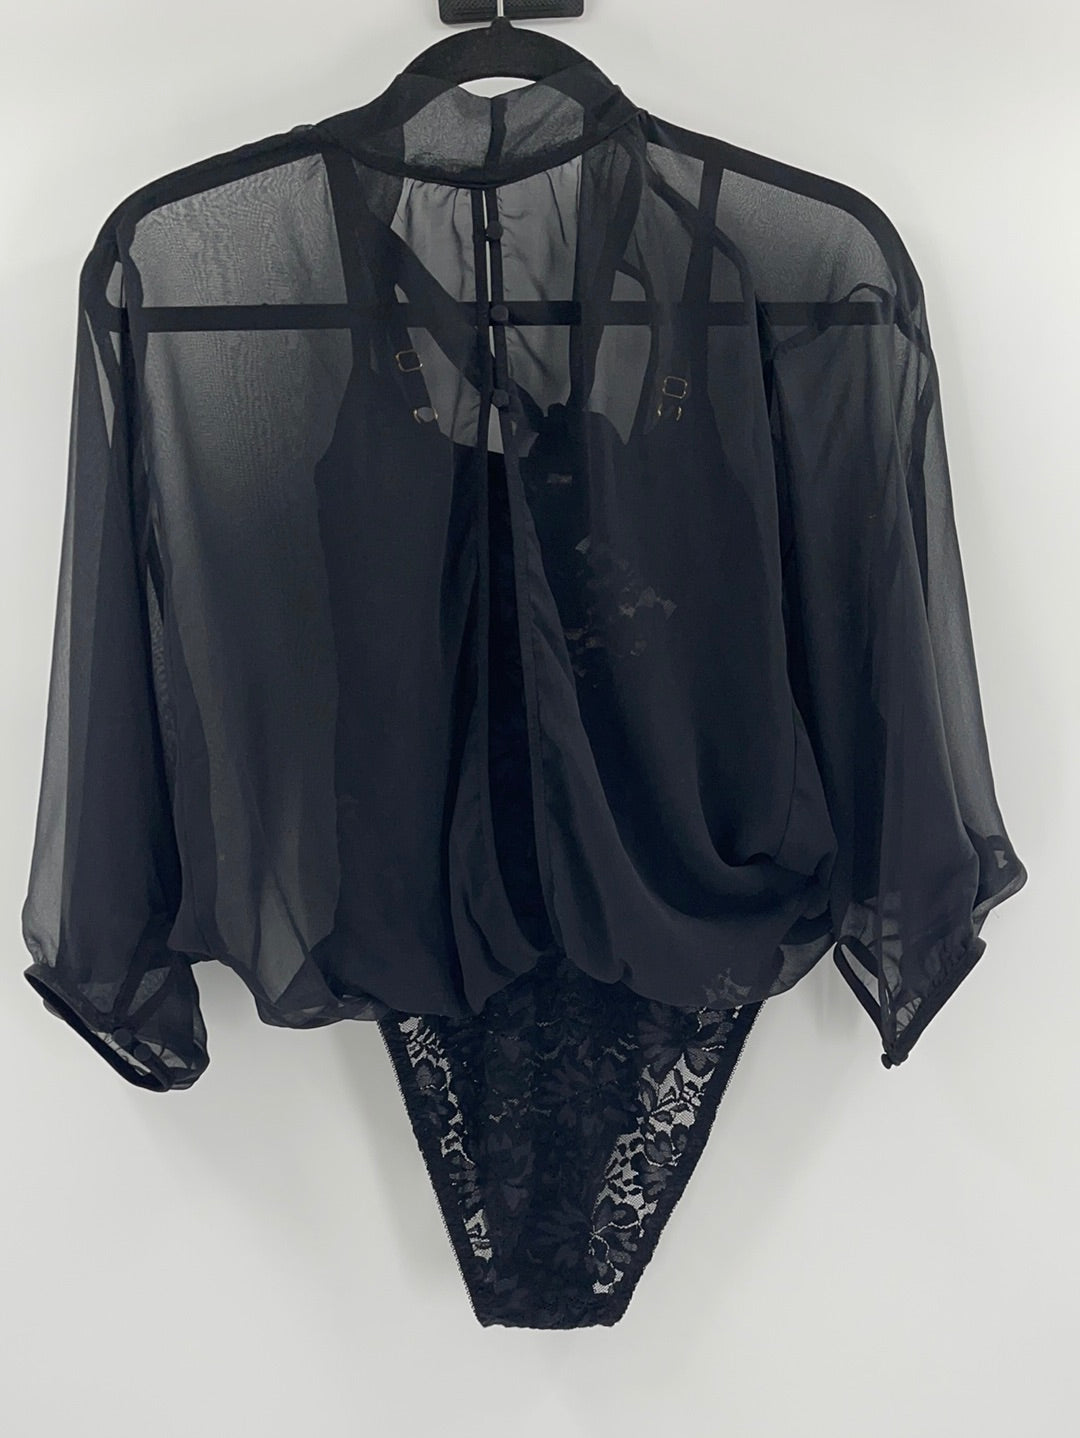 Hot as Hell Lace Body Suit with Sheer Blouse (XS)